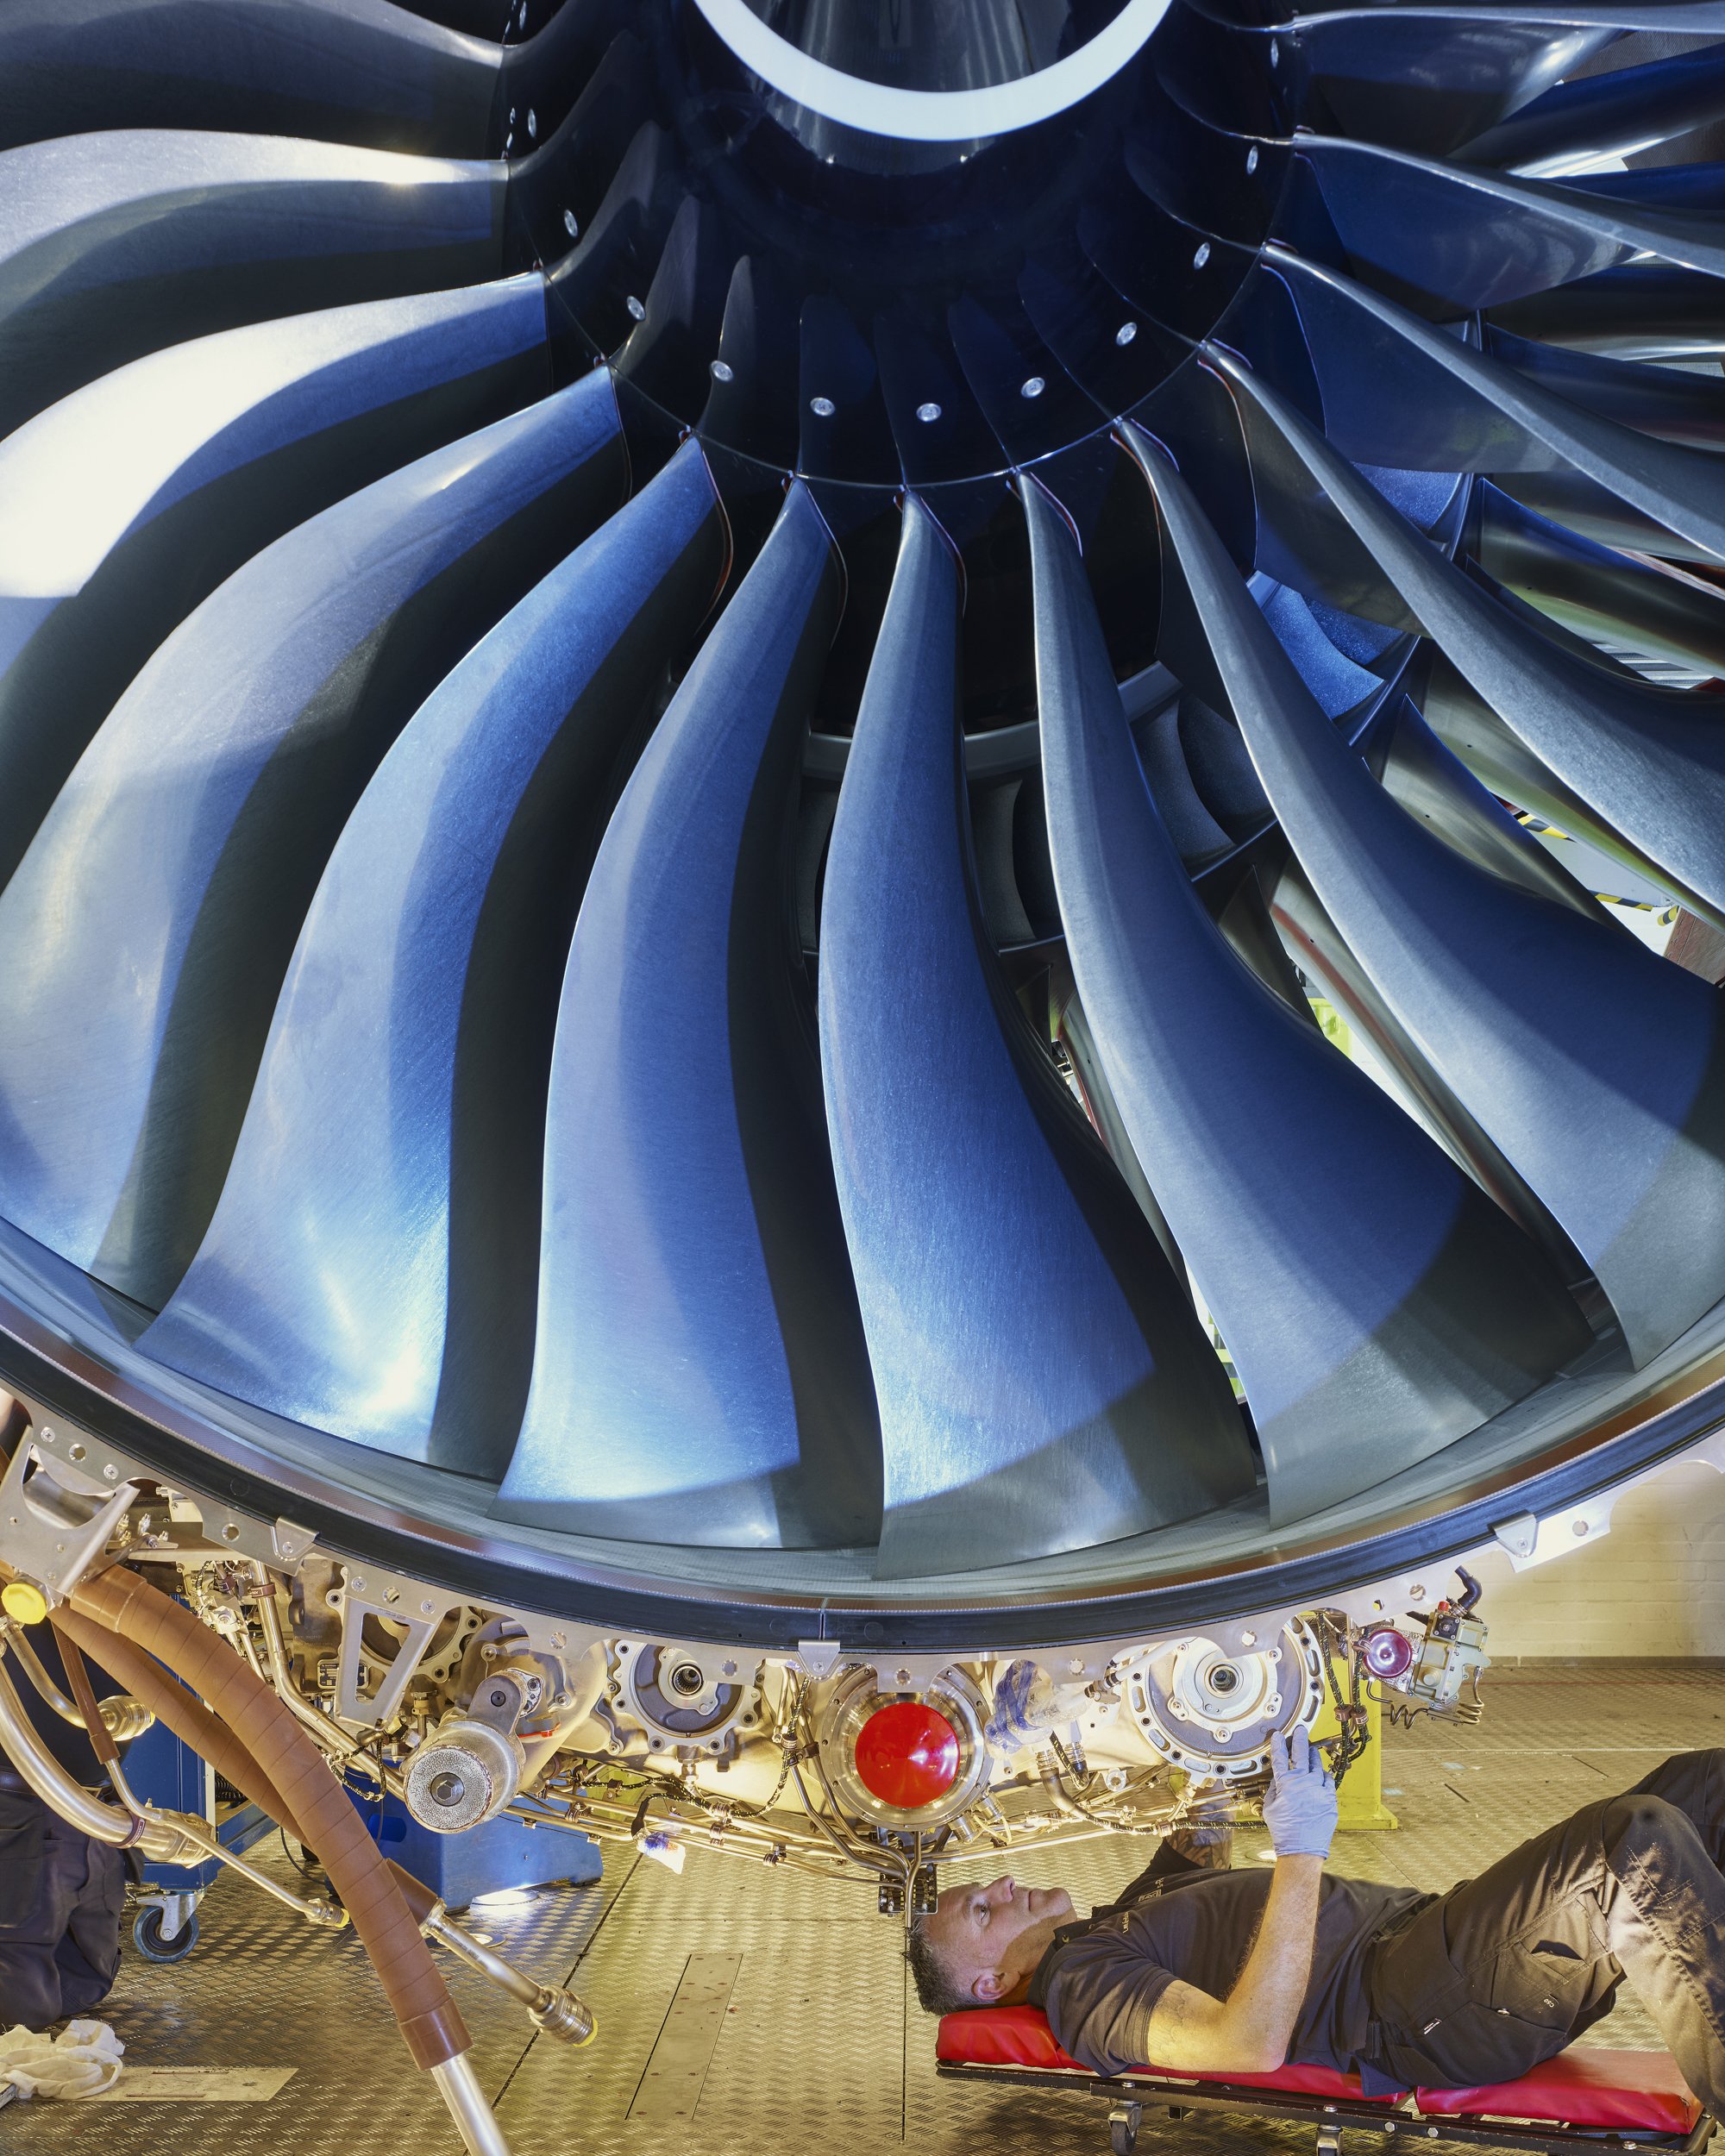  Rolls-Royce, Assembly Line Facility, Derby, UK. May 2021.Workstation n. 3, Trent XWB-84K at its final stage. Gas path borescope and internal inspections on the integrity of the turbine blade.Workstations areas are for cleaning, polishing, inspecting